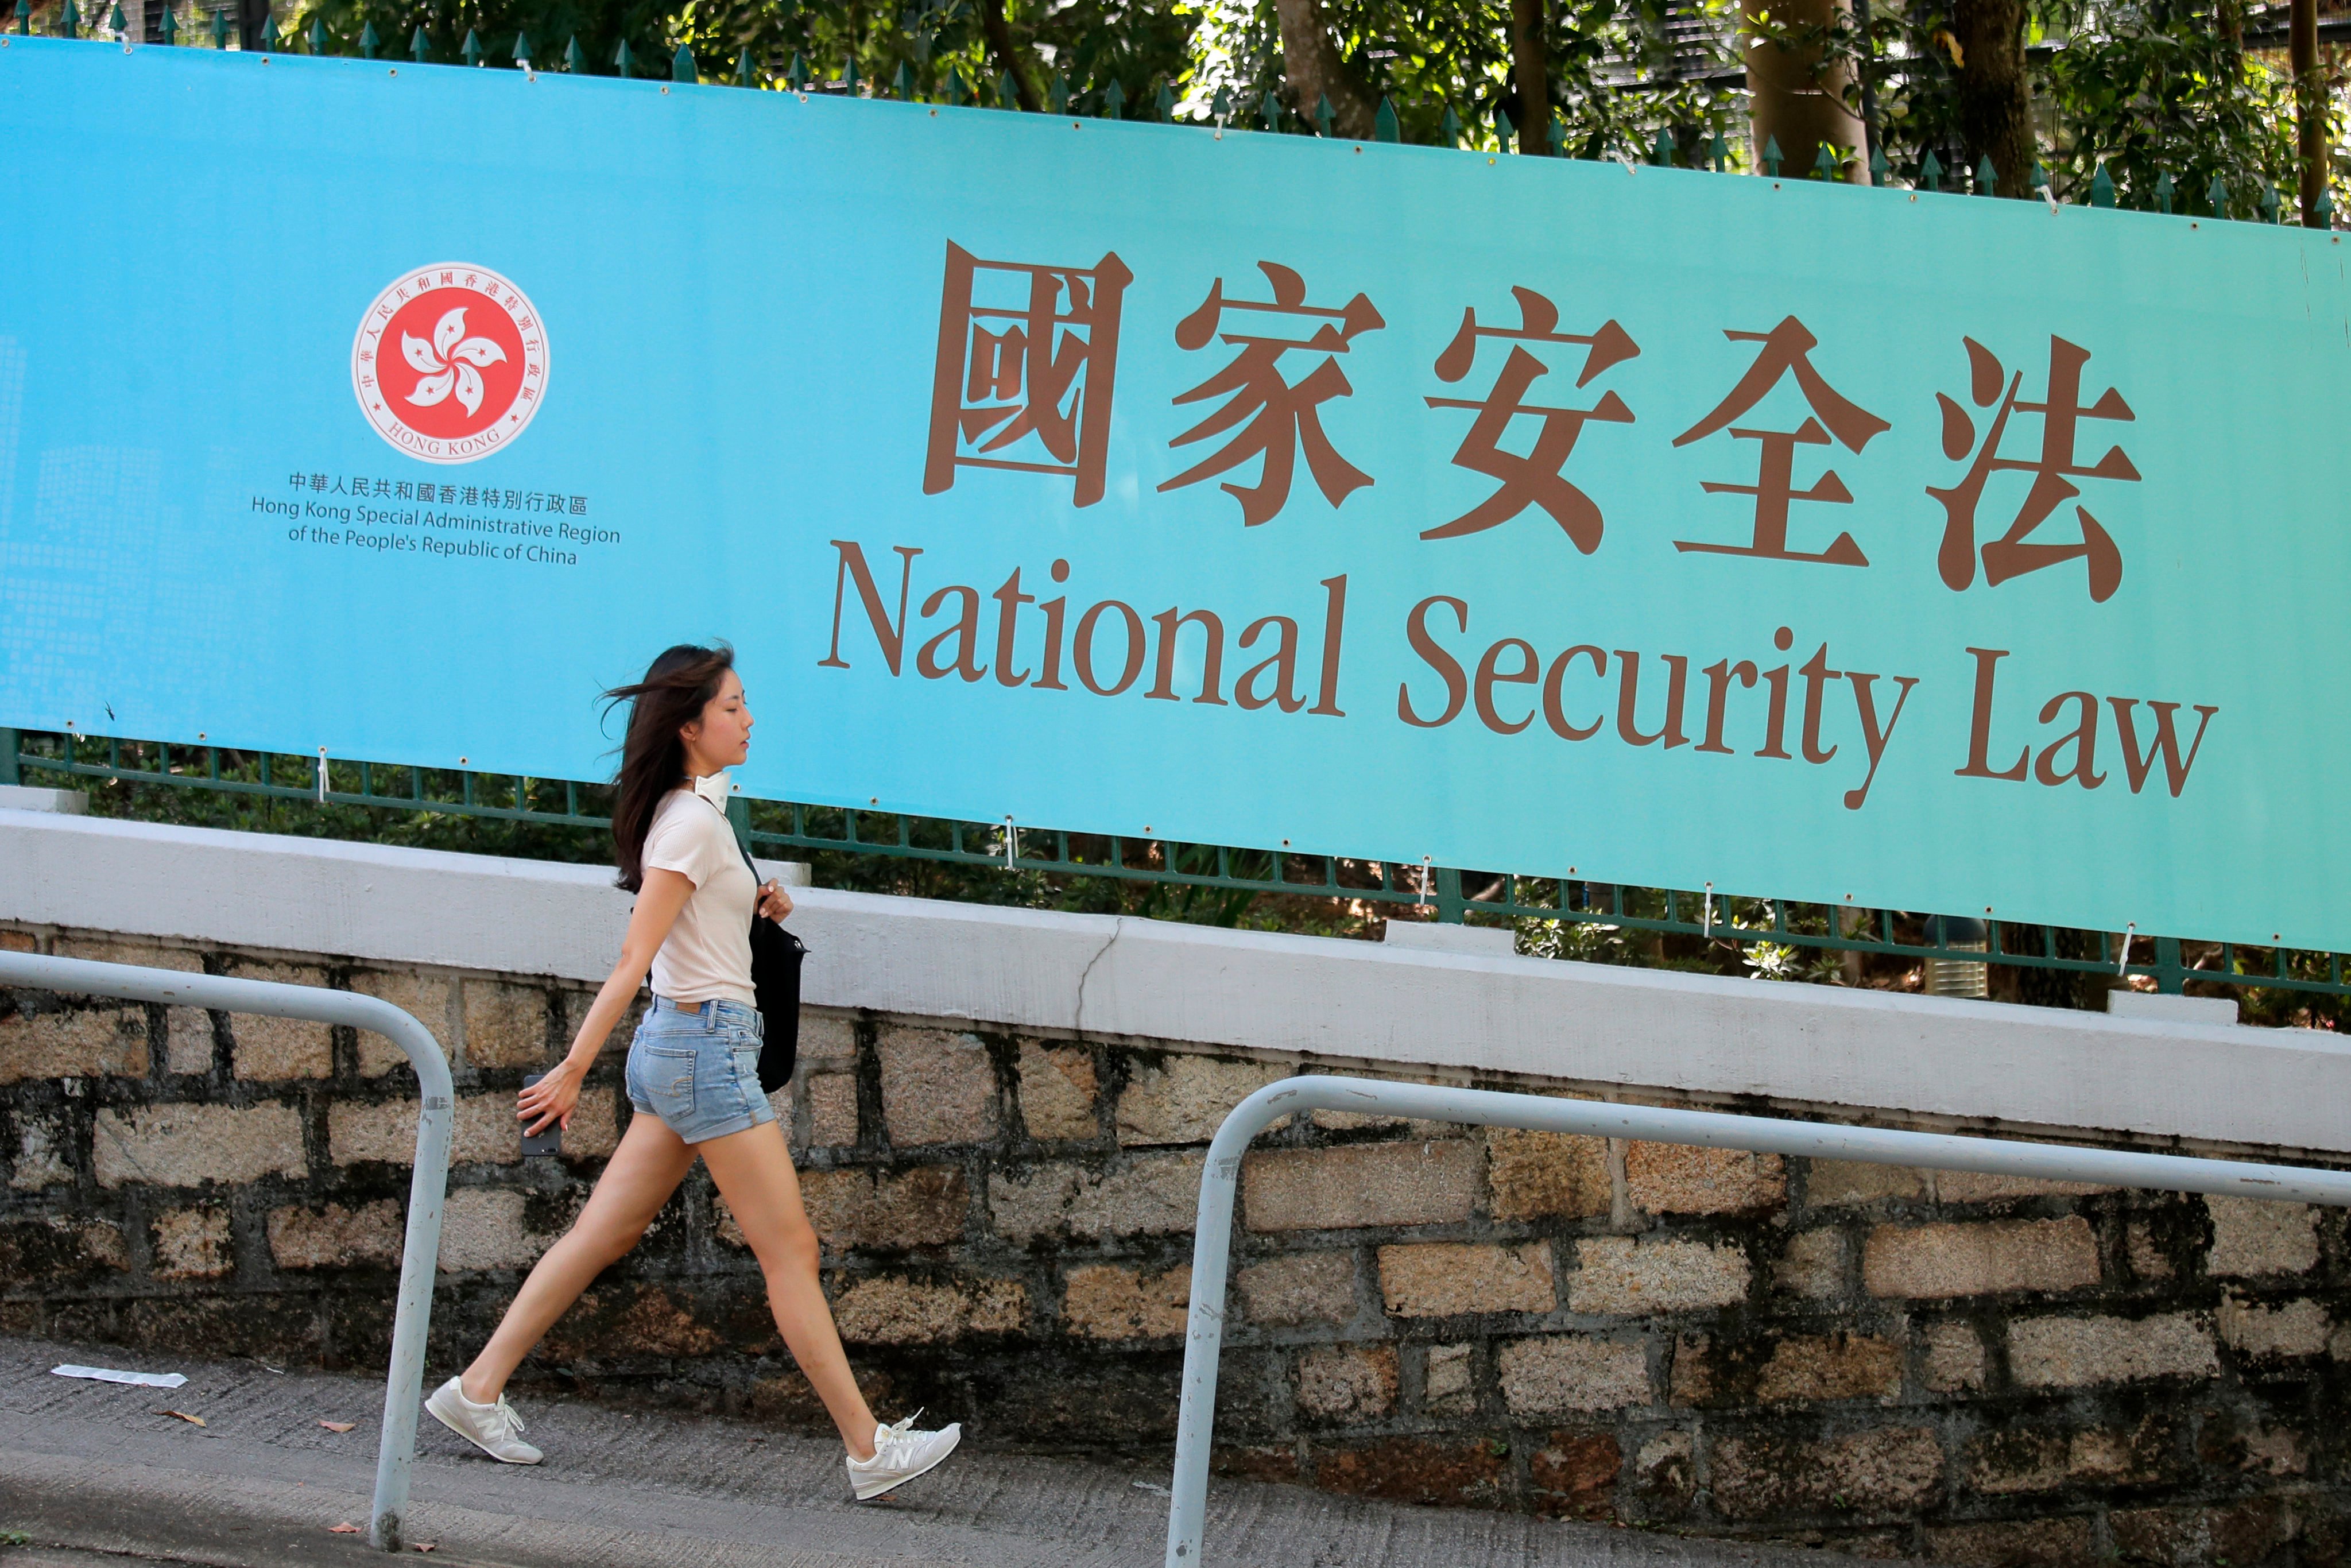 Hong Kong is required to enact its own national security law under Article 23 of the Basic Law. Photo: AP